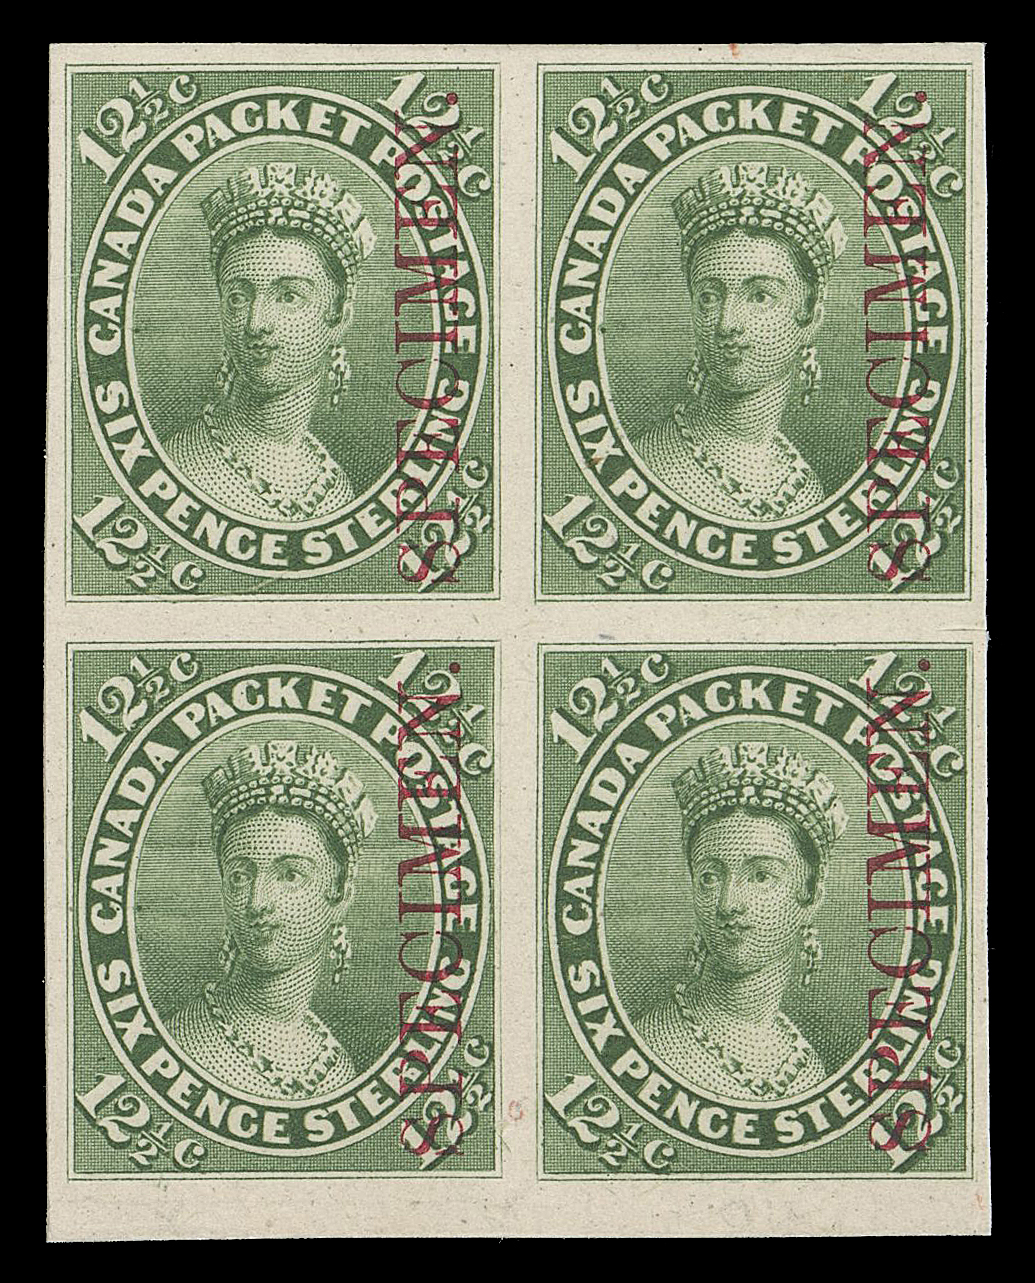 SEVEN AND ONE HALF PENCE AND TWELVE AND ONE HALF CENTS  18Pi + variety,An appealing plate proof block on card mounted india paper, vertical SPECIMEN overprint in carmine, part sheet margin at foot,  tiny scissor cut entirely confined to margin at right pair, shows the Major Re-entry (Position 94) on lower right proof with characteristic doubling in first "E" of "PENCE" and very noticeable in and around "TAGE" of "POSTAGE"; the best known and most prominent plate variety found on this denomination, VF (Unitrade cat. as normal proofs)

Provenance: The "Lindemann" Collection (private treaty, circa. 1997)